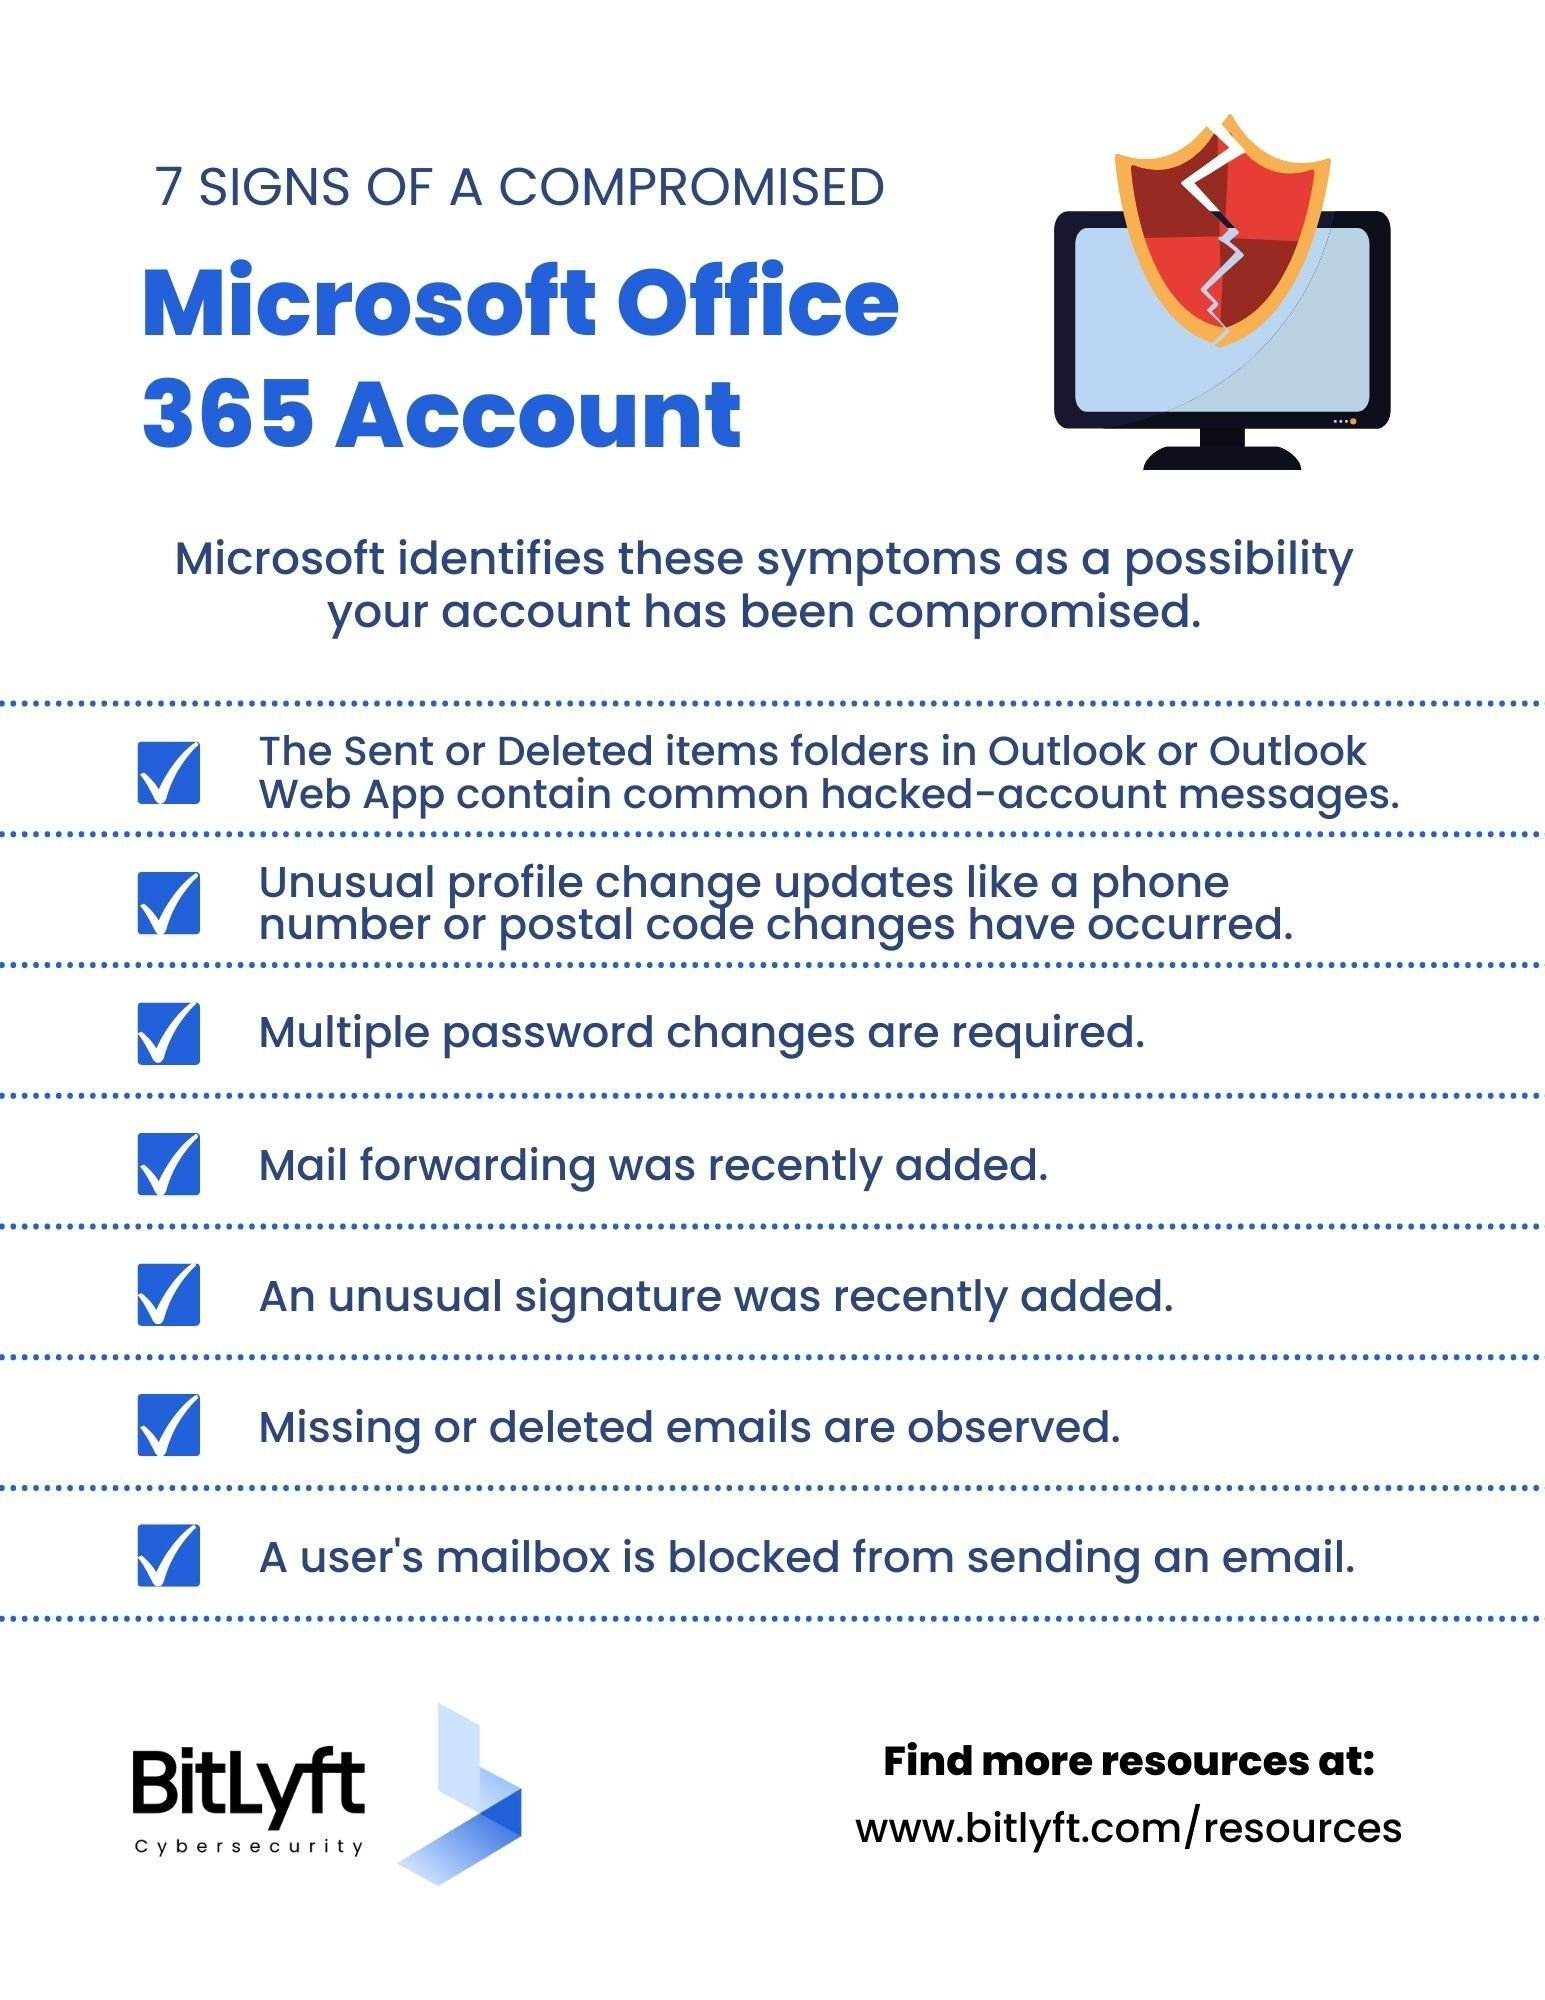 7 Signs of a Compromised Microsoft Office 365 Account